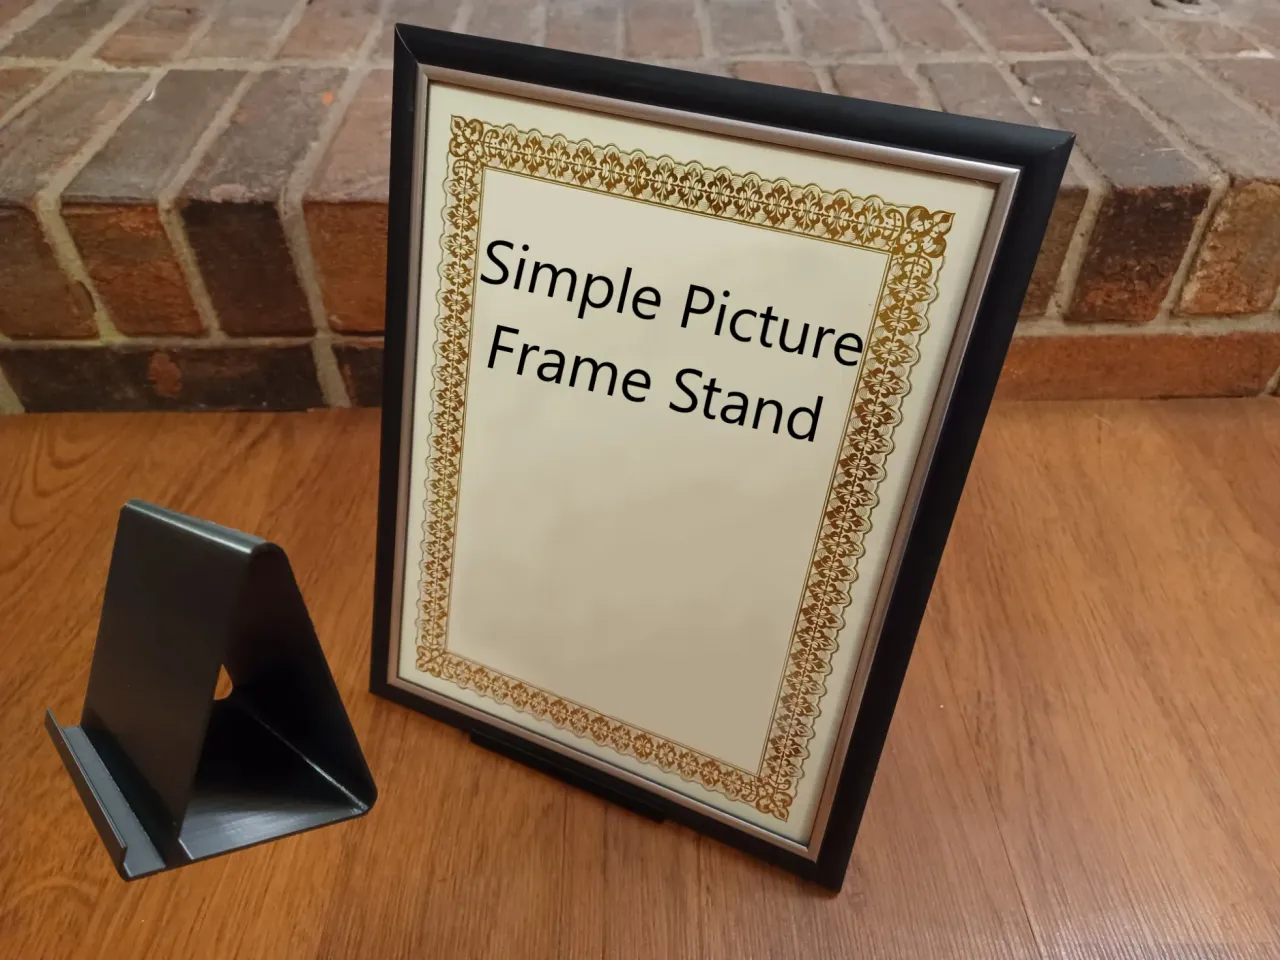 Simple Picture Frame Stand - Low Profile by rngilligan